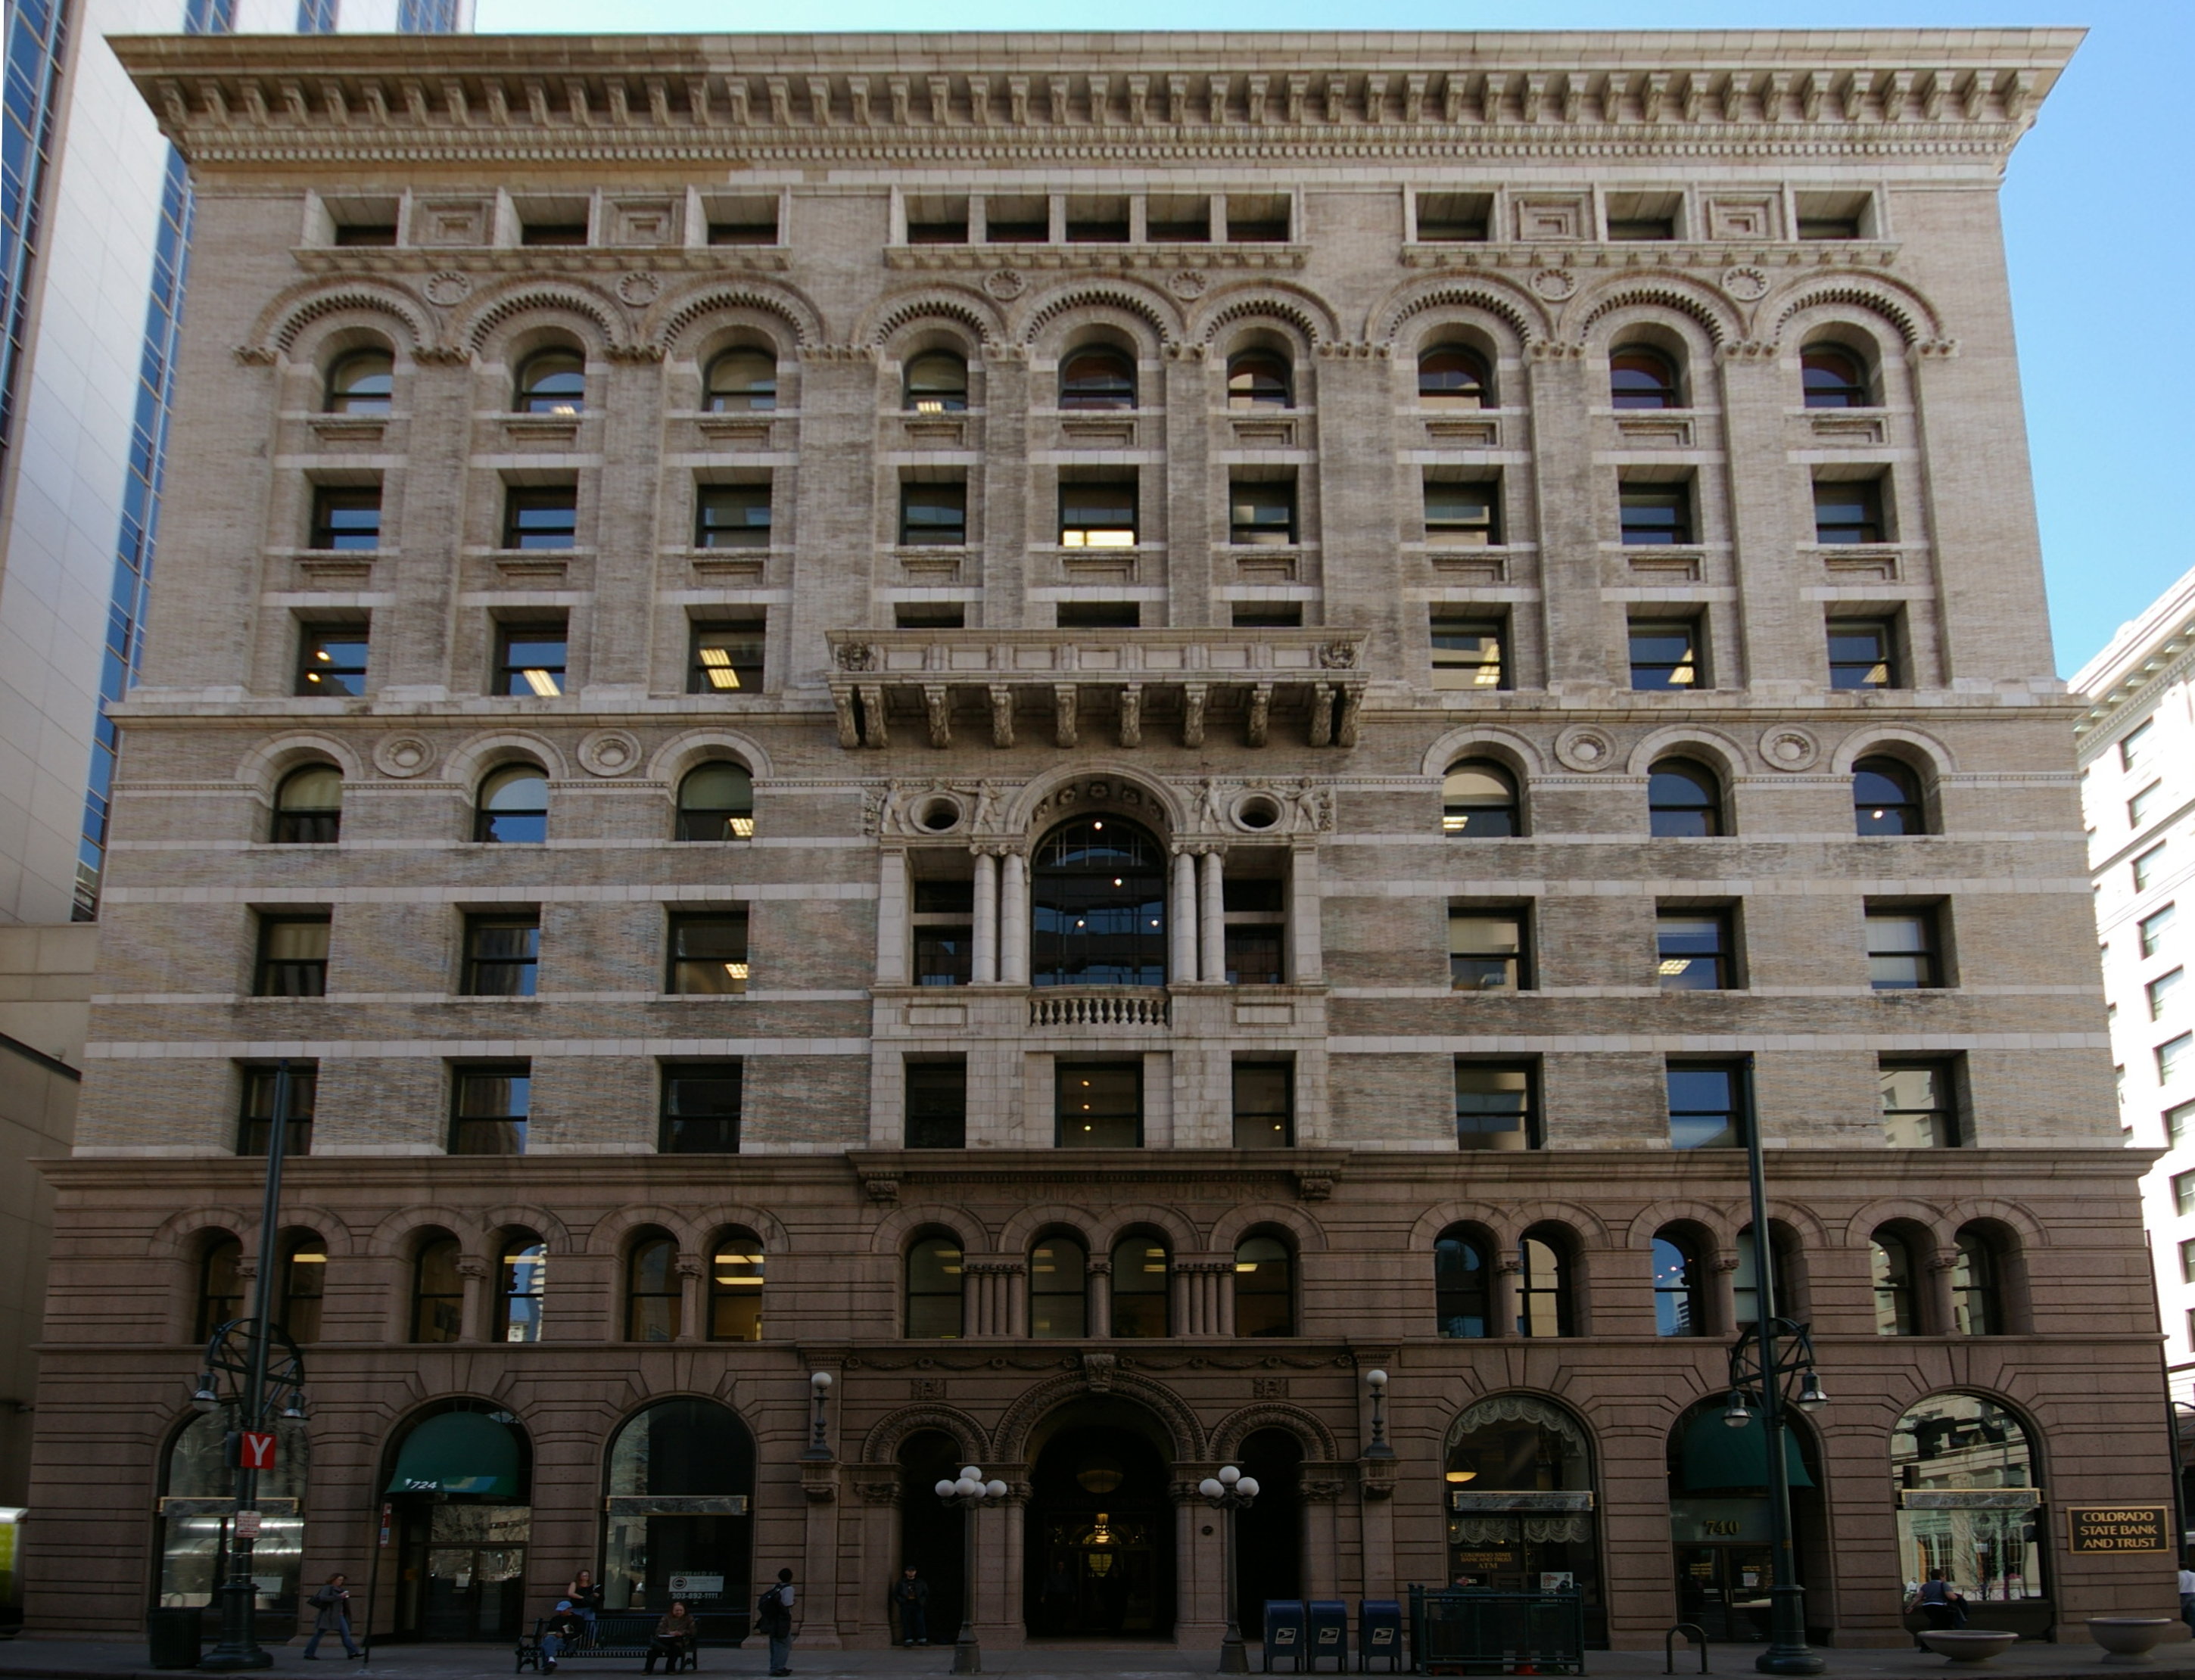 The Equitable Building, Denver's tallest building from 1892 to 1911, stands on a section of Seventeenth Street often known as the "Wall Street of the West".